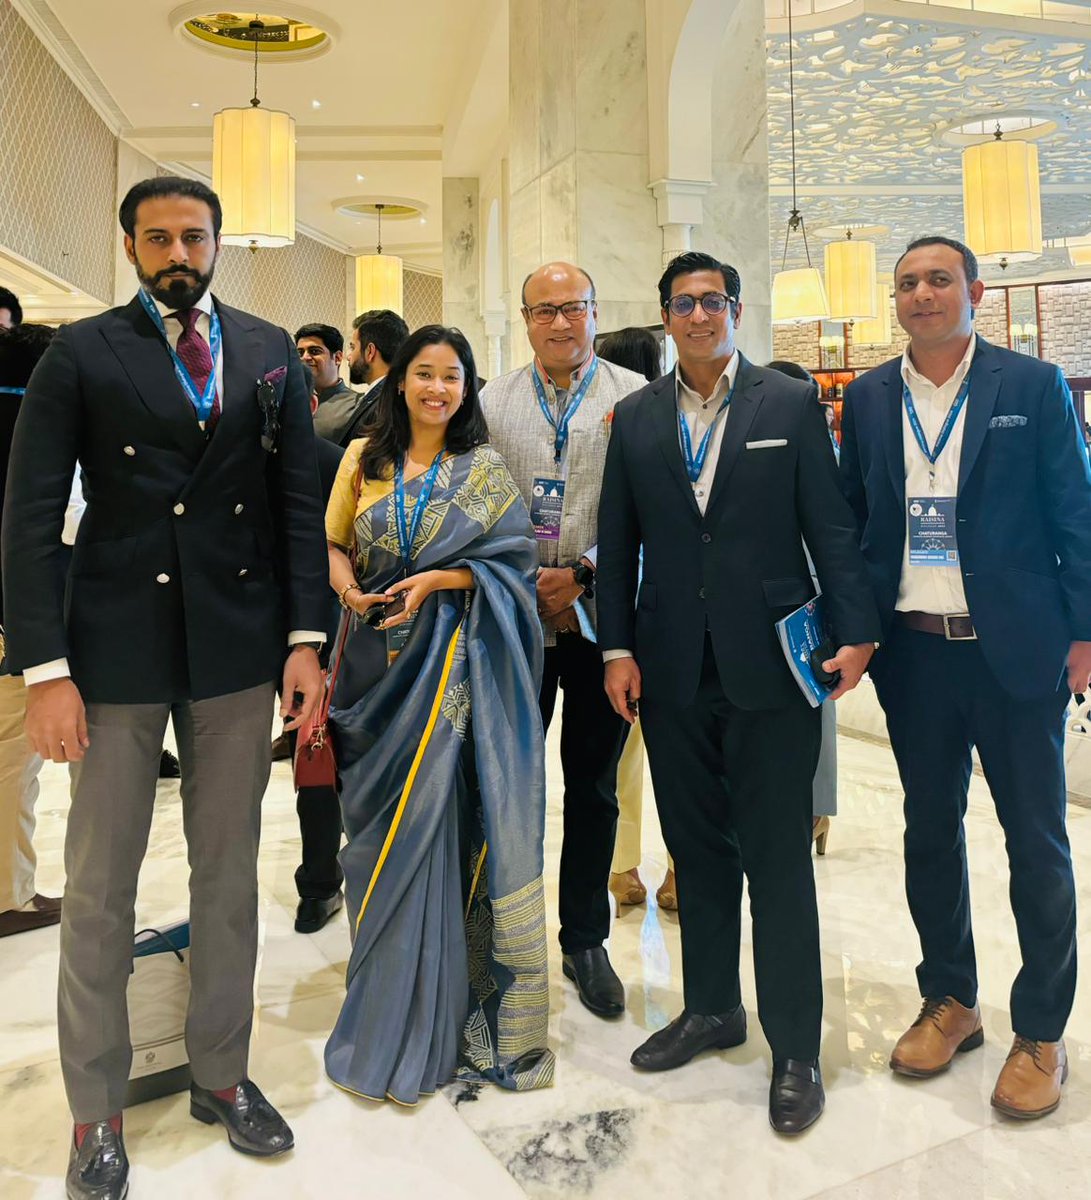 Exciting day for @ClimateParliam1 at Raisina Dialogue 2024 in Delhi! Engaging discussions on vital climate issues and fostering international cooperation for a sustainable future. and Honoured to have Mr @RazzaqNahim MP. @orfonline #Raisina2024 #RaisinaDialogue2024